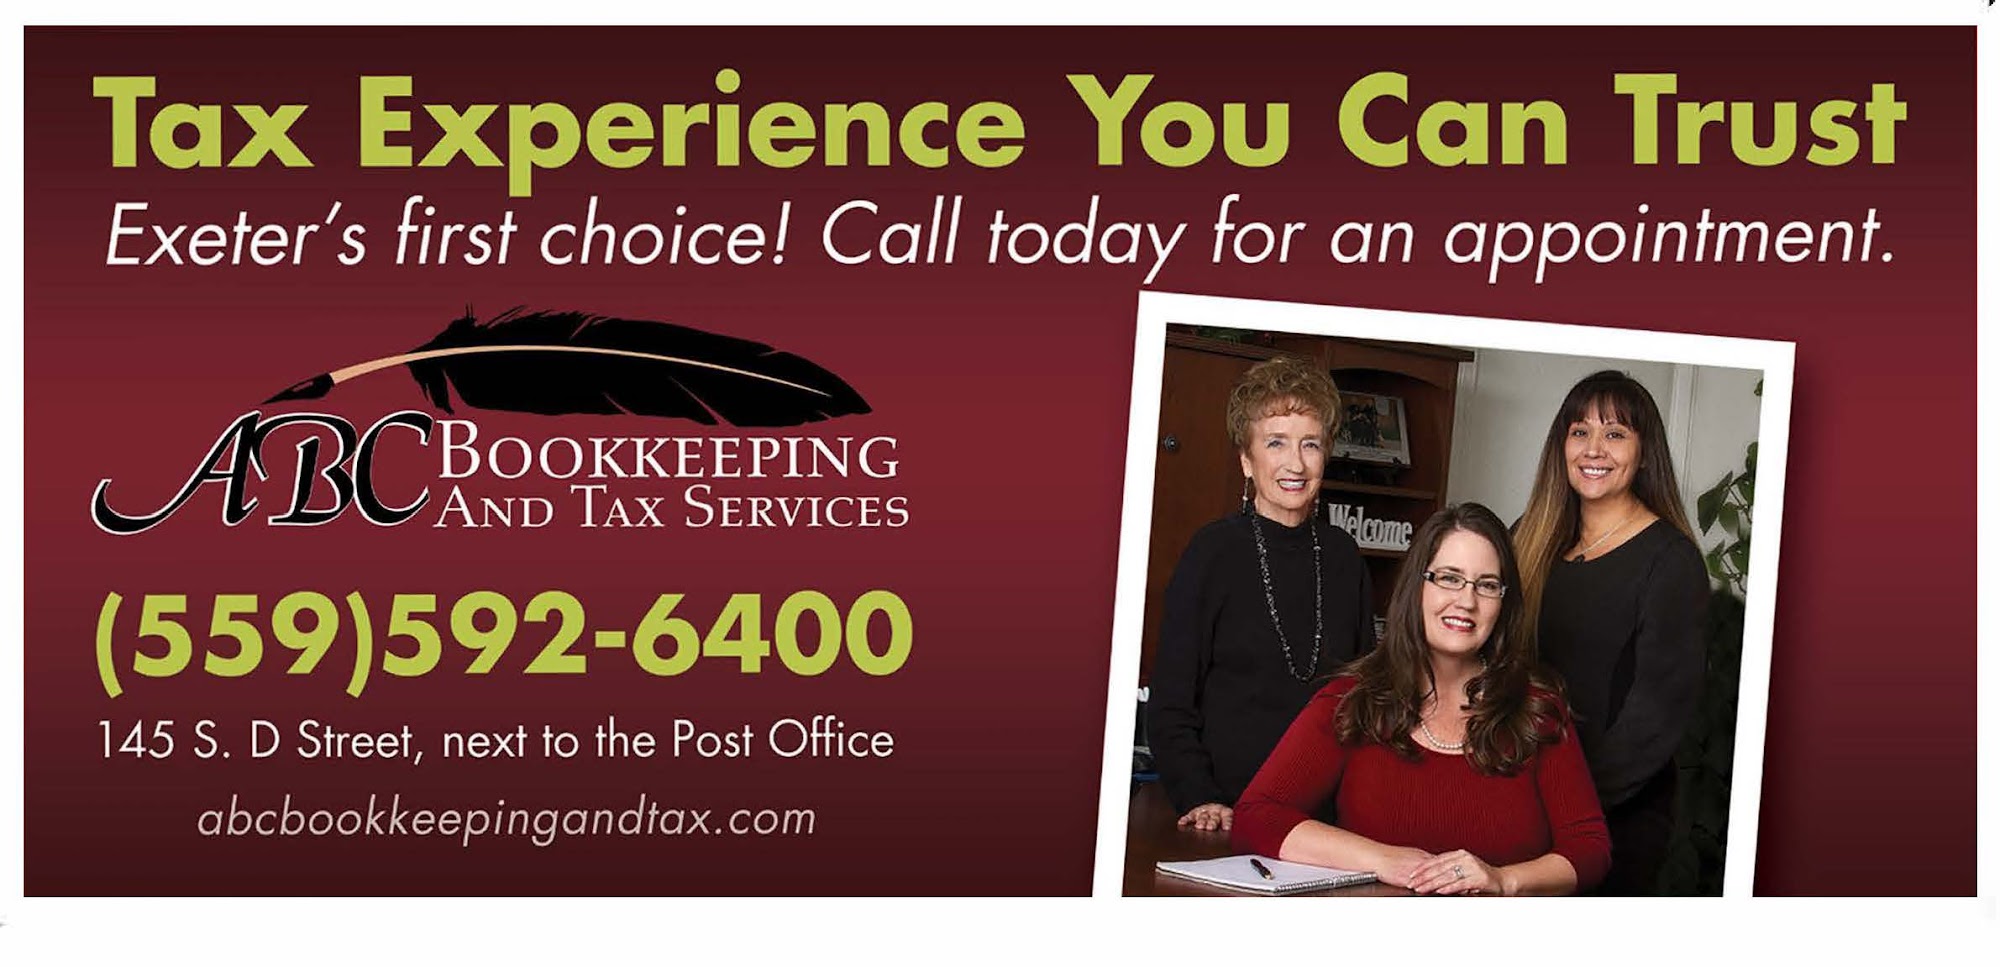 ABC Bookkeeping and Tax Services, Inc.